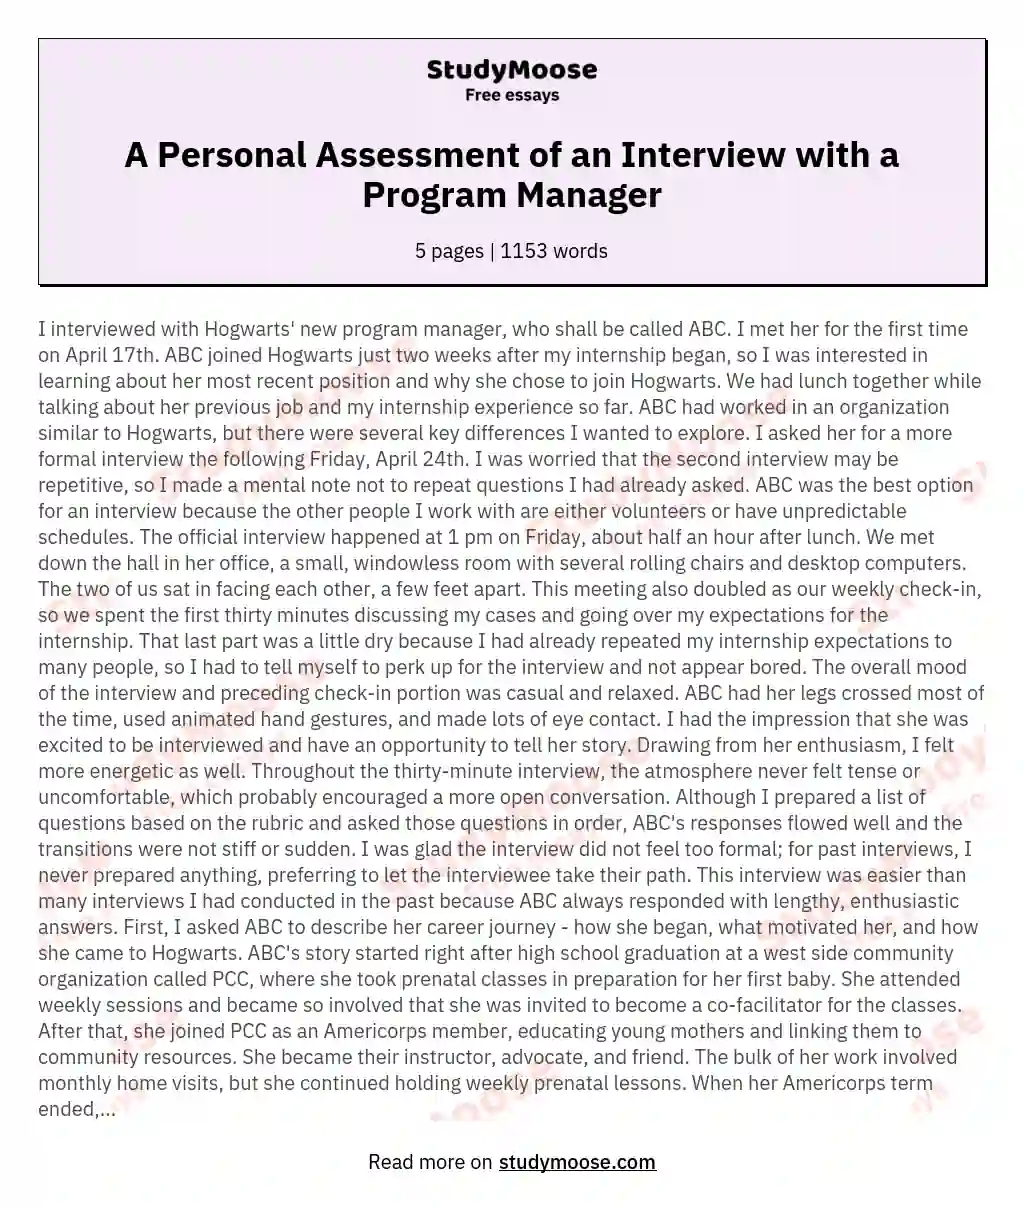 A Personal Assessment of an Interview with a Program Manager essay